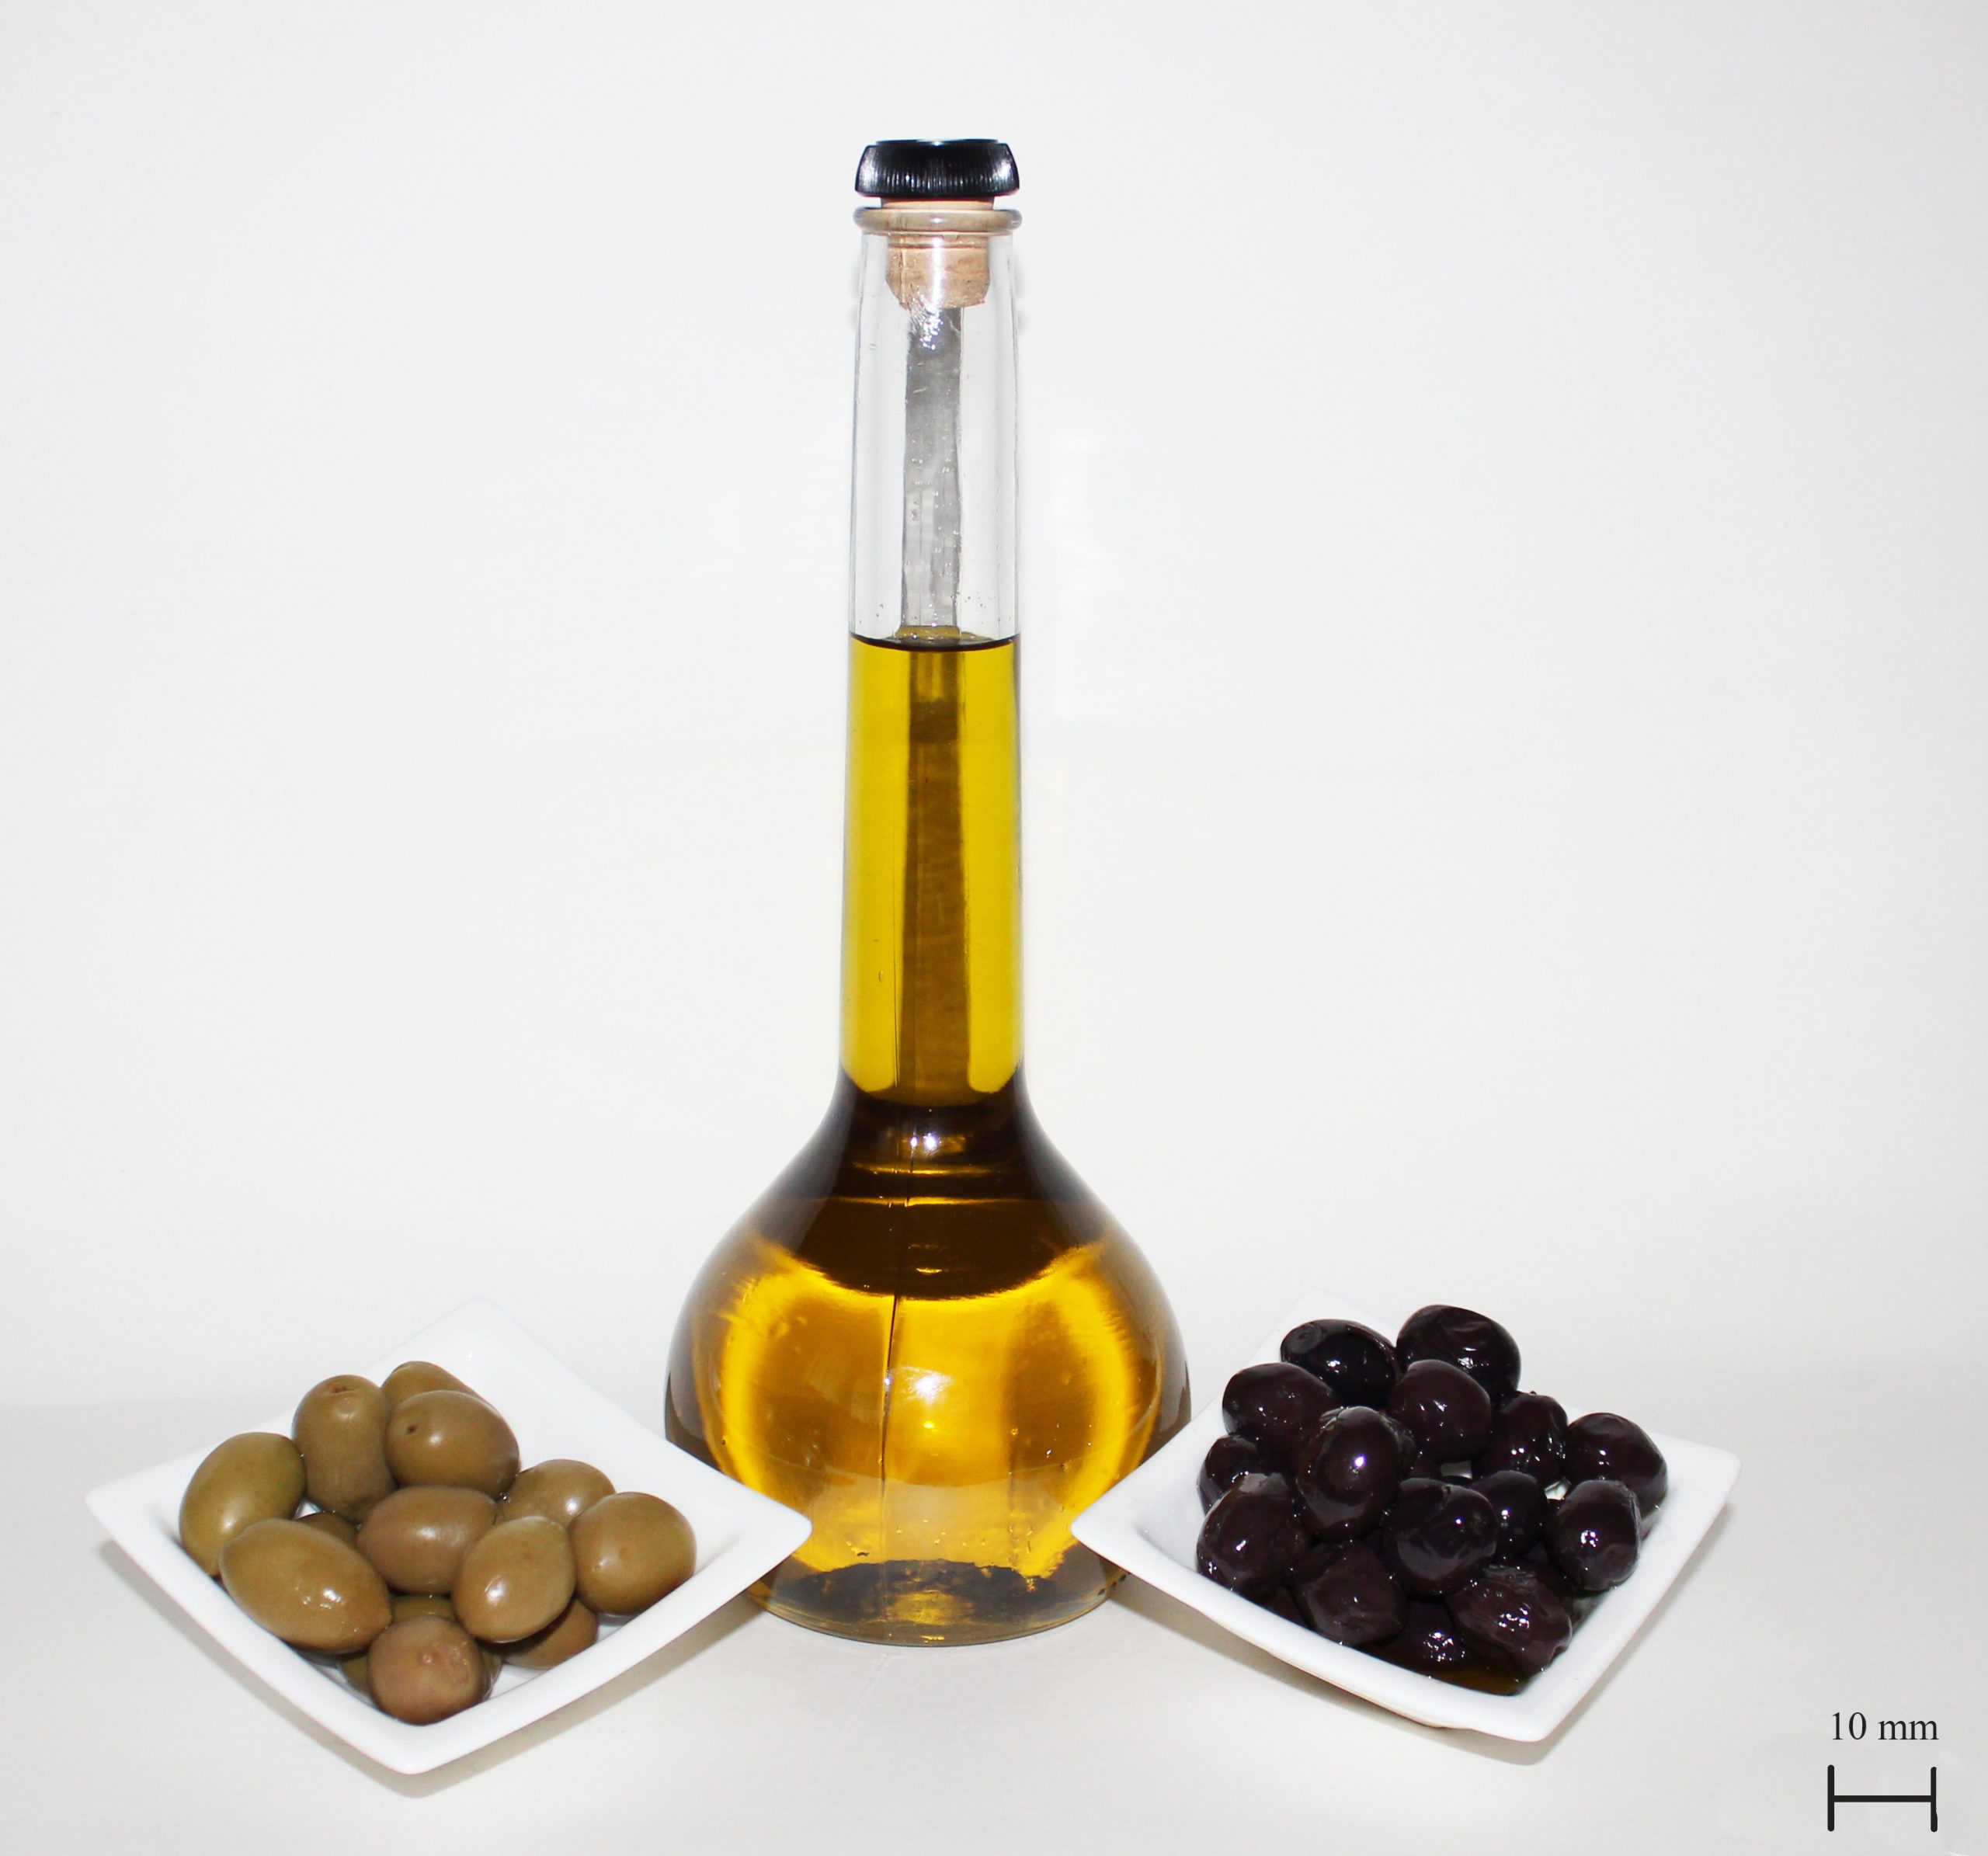 tall olive oil bottle, bulbous at bottom with tall narrow stem, containing deep yellow oil, green olives in white dish on left, black olives on white dish on right - white background